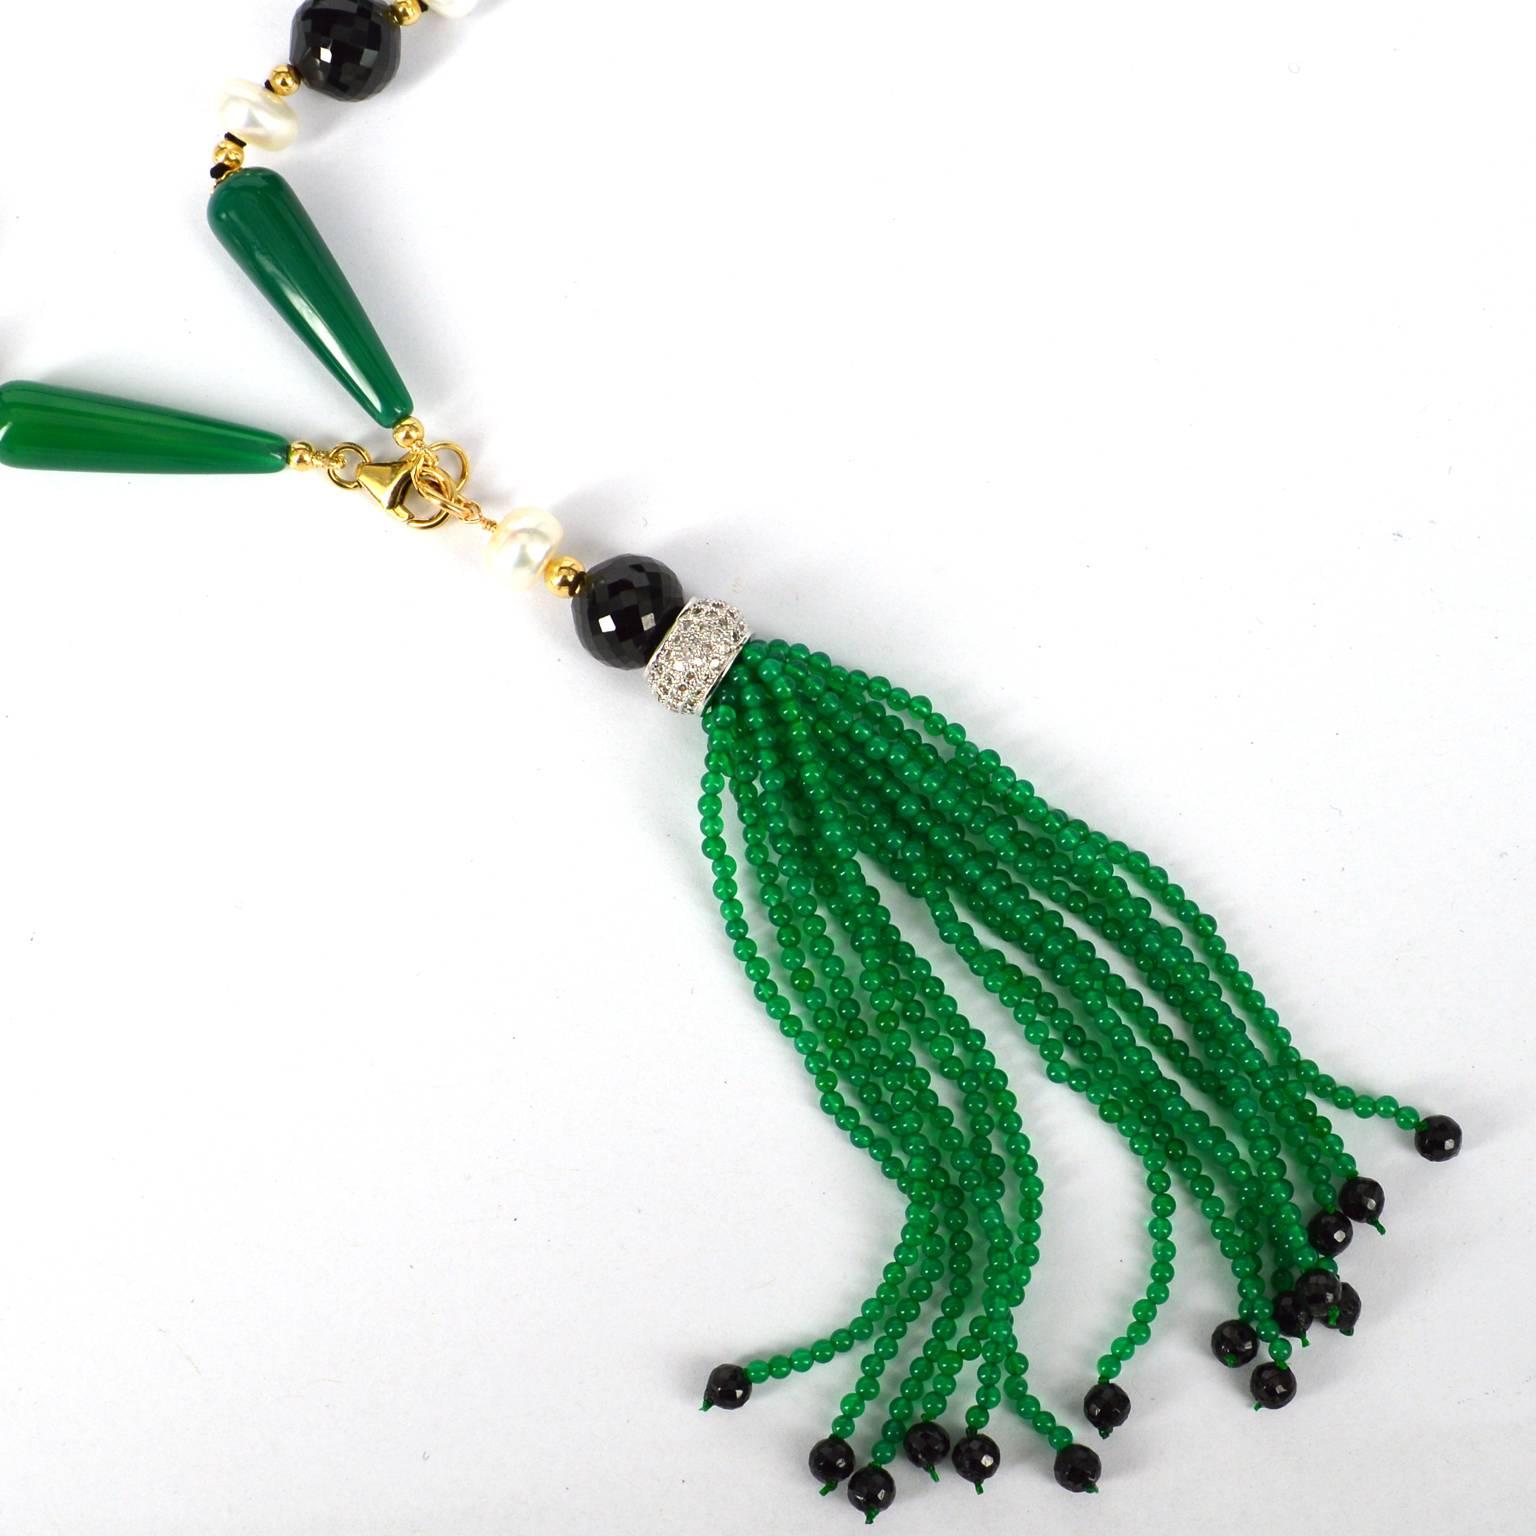 Art Deco style long knotted necklace with 8x28mm polished Green Agate teadrops, 10mm faceted round and 7mm faceted rondel Spinel beads, 8mm Fresh Water Button Pearls. 14k Gold filled 3mm beads, caps and clasp. Tassel is 15 strands of 2mm Green agate